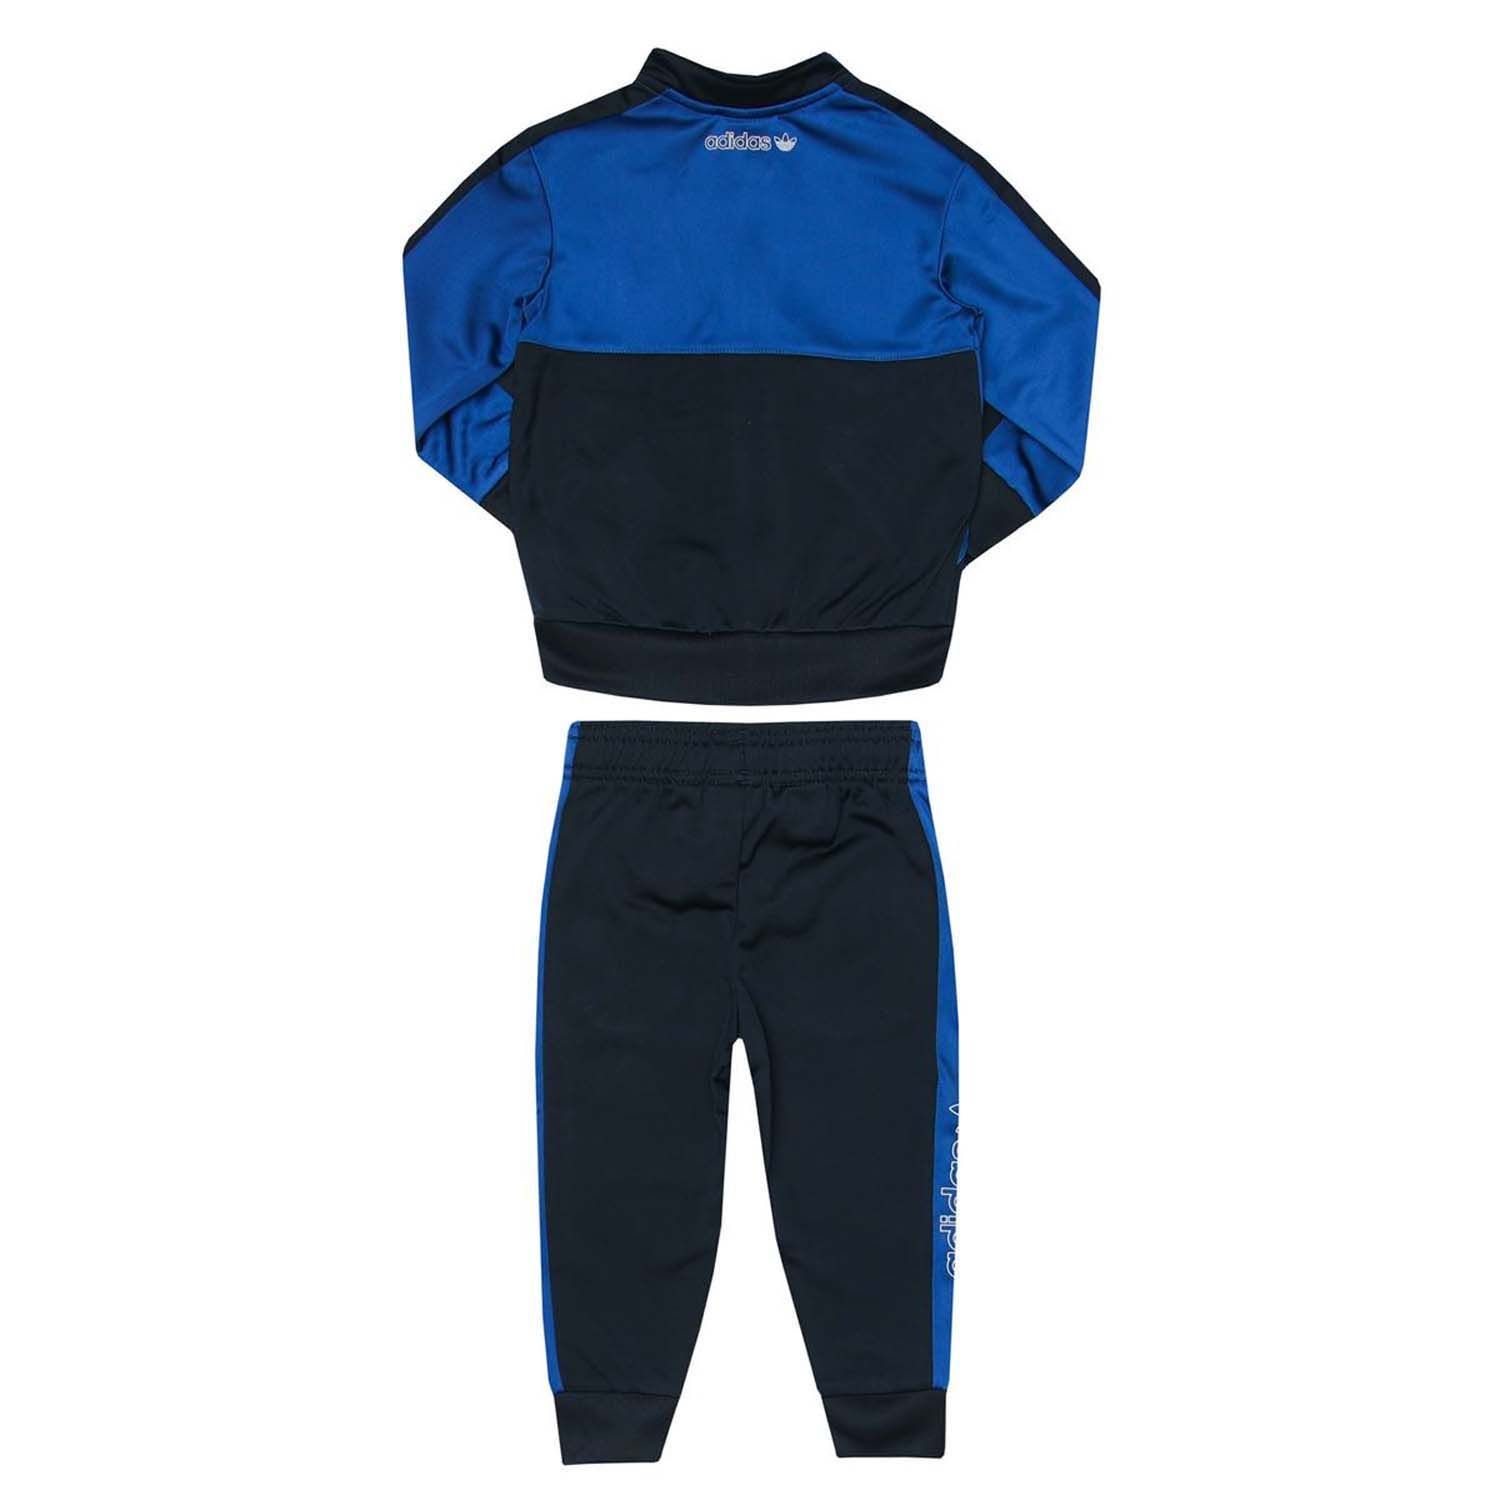 Baby adidas Originals SPRT Collection Tracksuit in royal navy. Jacket:- Stand-up collar.- Long sleeves.- Full zip fastening.- Side slip-in pockets.- Ribbed cuffs and hem.- Printed branding.- Regular fit.- Main material: 100% Polyester (Recycled). Pants: - Elasticated drawcord waist.- Two slip pockets.- Ribbed ankle cuffs.- Printed branding.- Regular it.- Main material: 100% Polyester (Recycled). - Ref: GN2275B